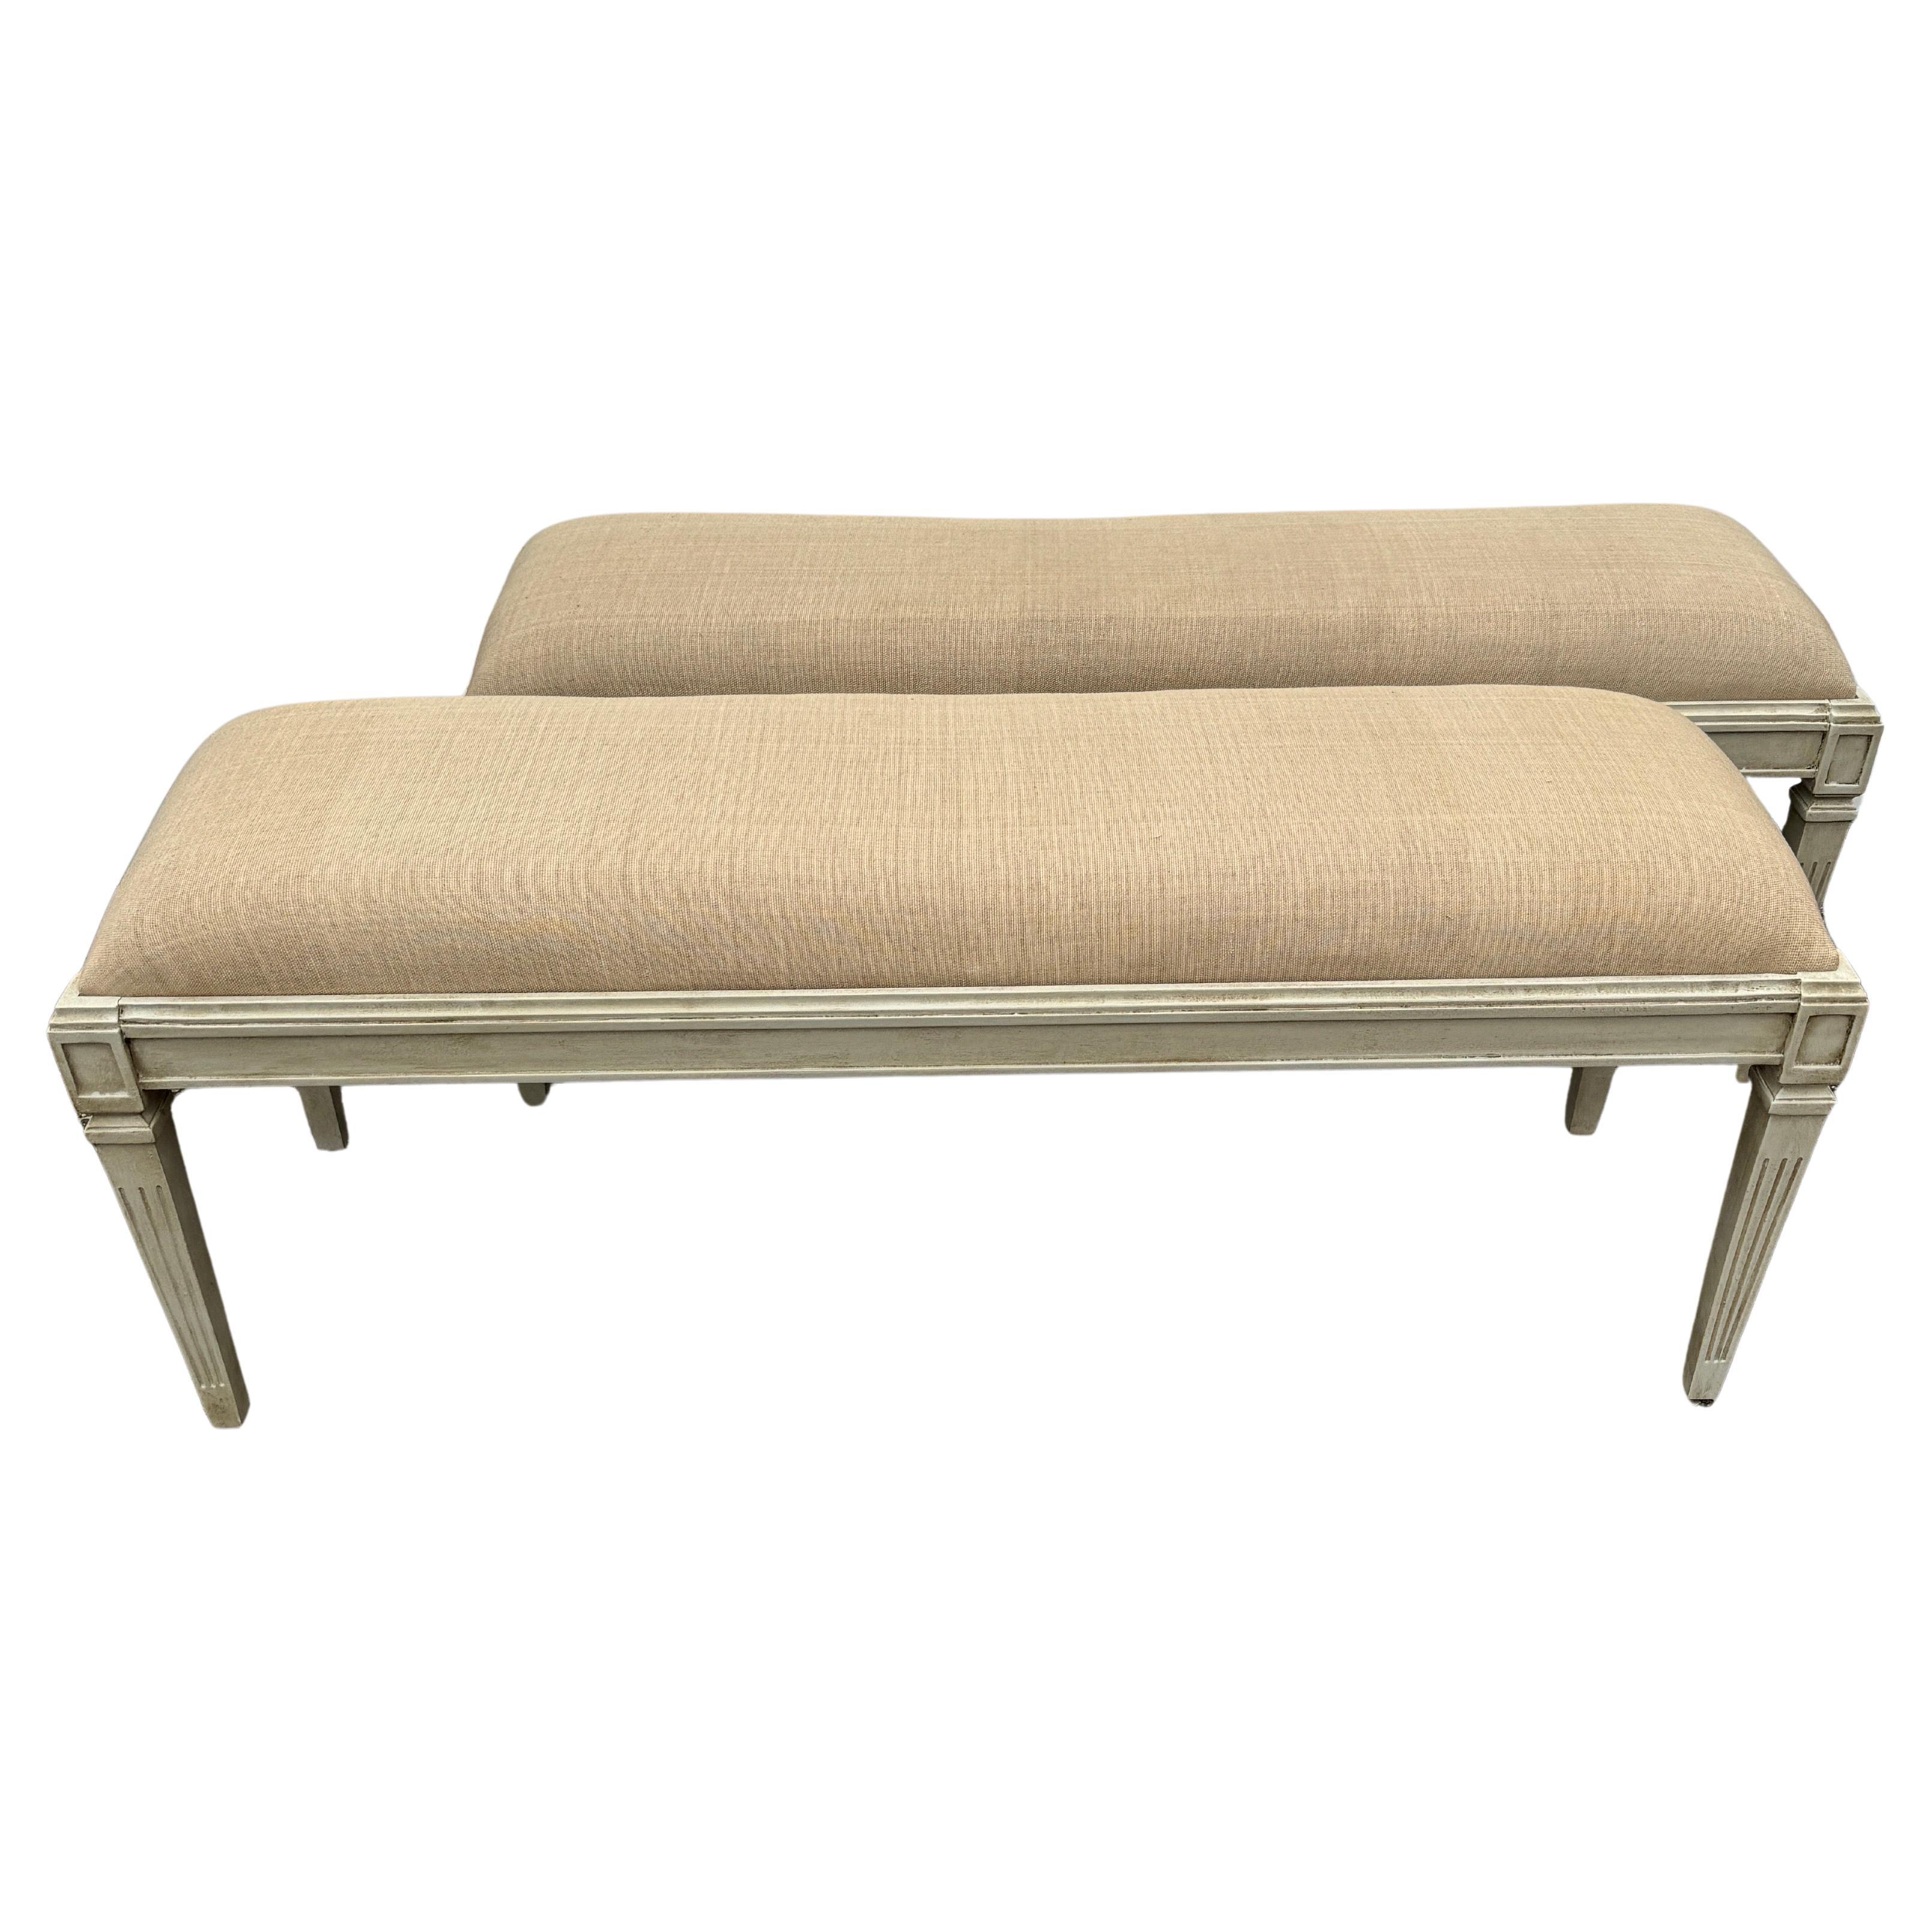 Pair Of Wide Painted Upholstered Benches in Swedish Gustavian Style For Sale